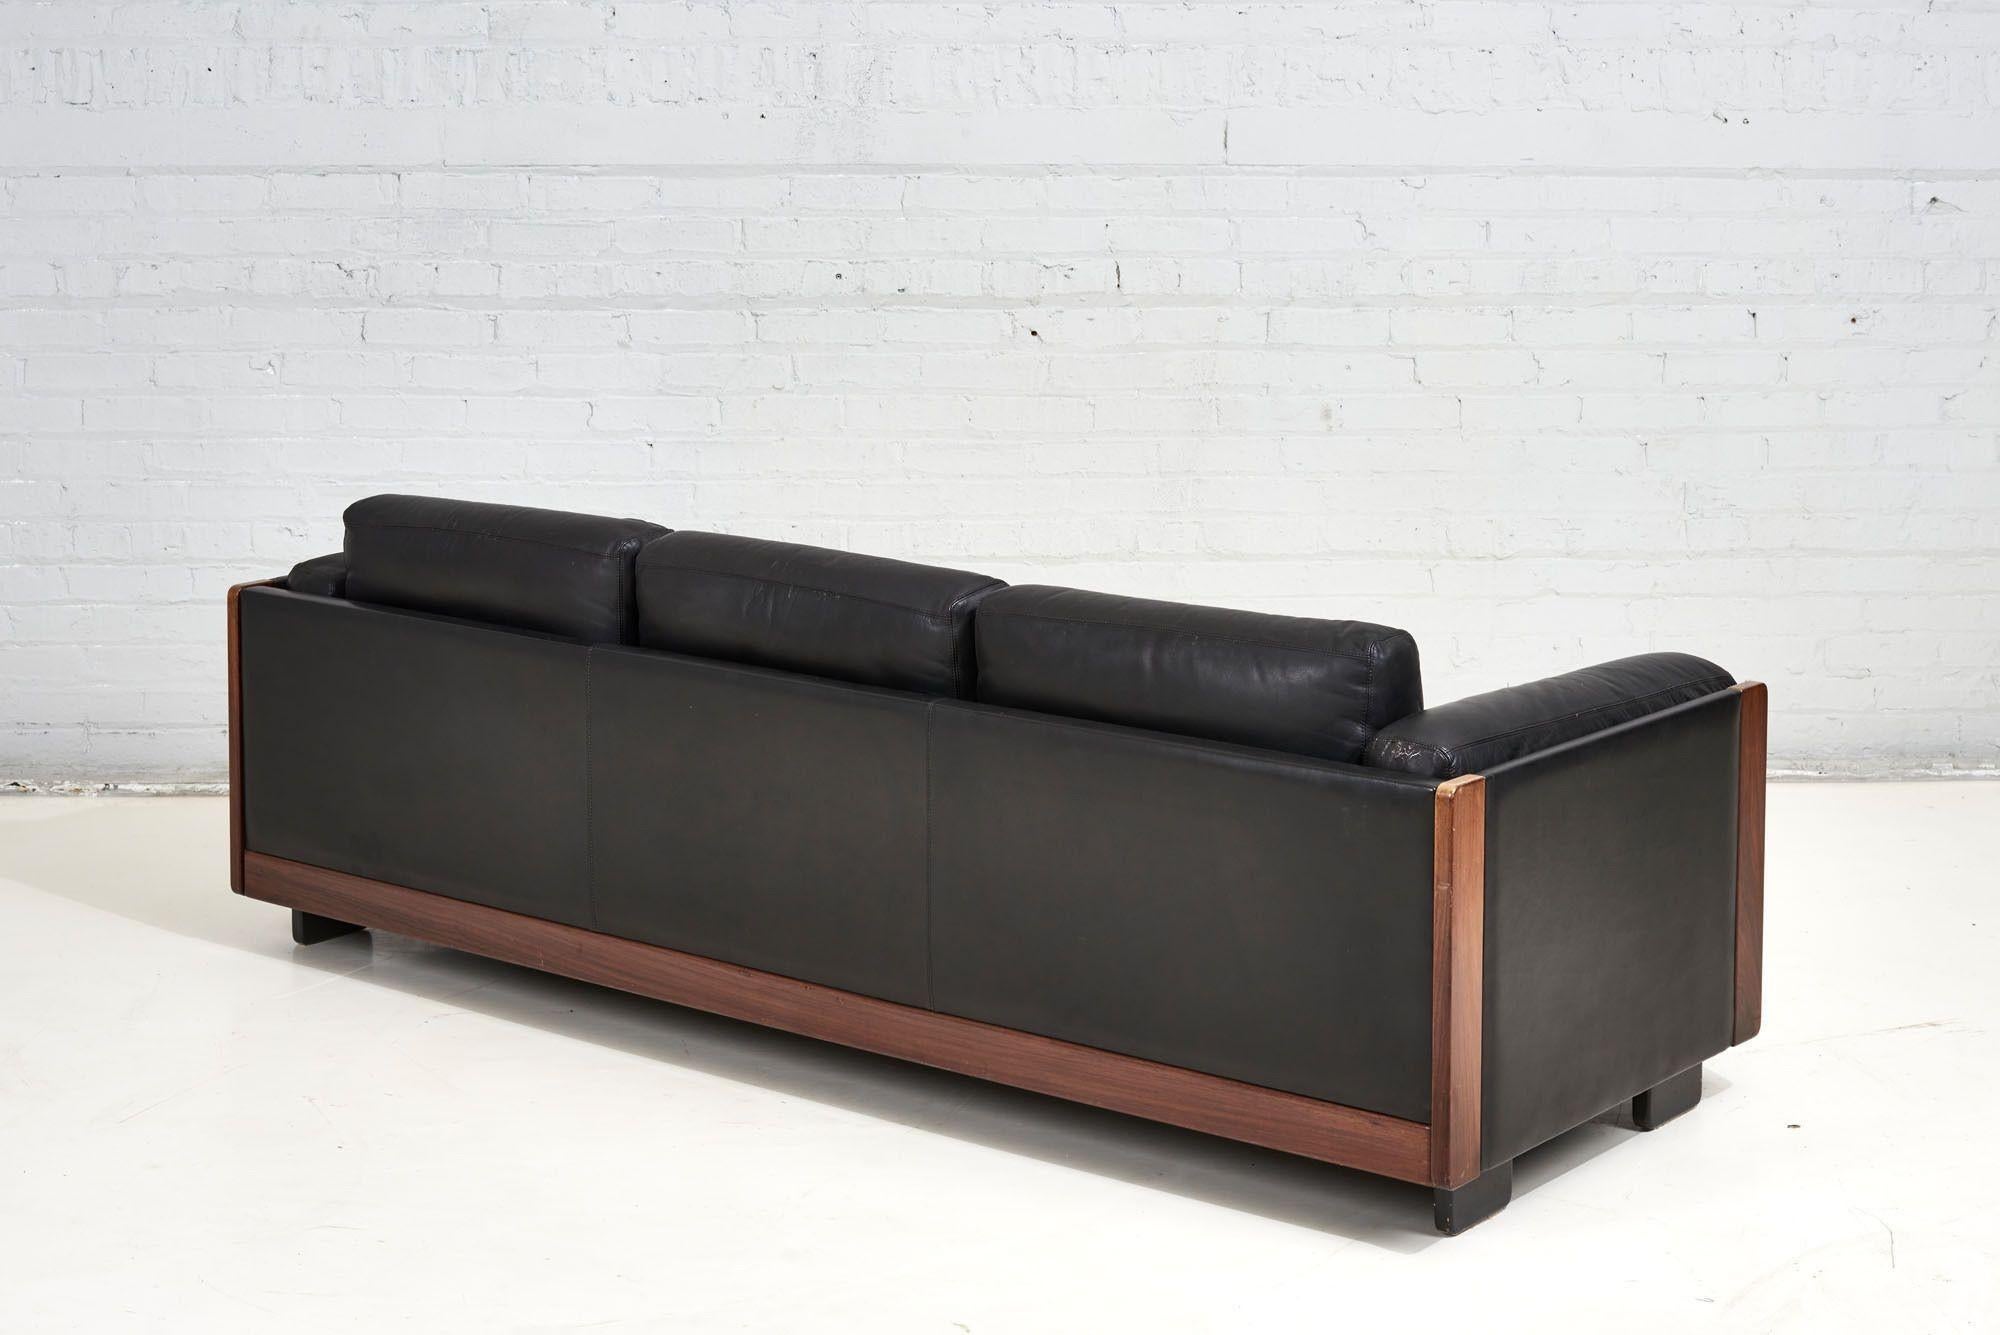 Black Leathe/Rosewood “920 Sofa”, Afra & Tobia Scarpa for Cassina, Italy 1960 In Good Condition For Sale In Chicago, IL